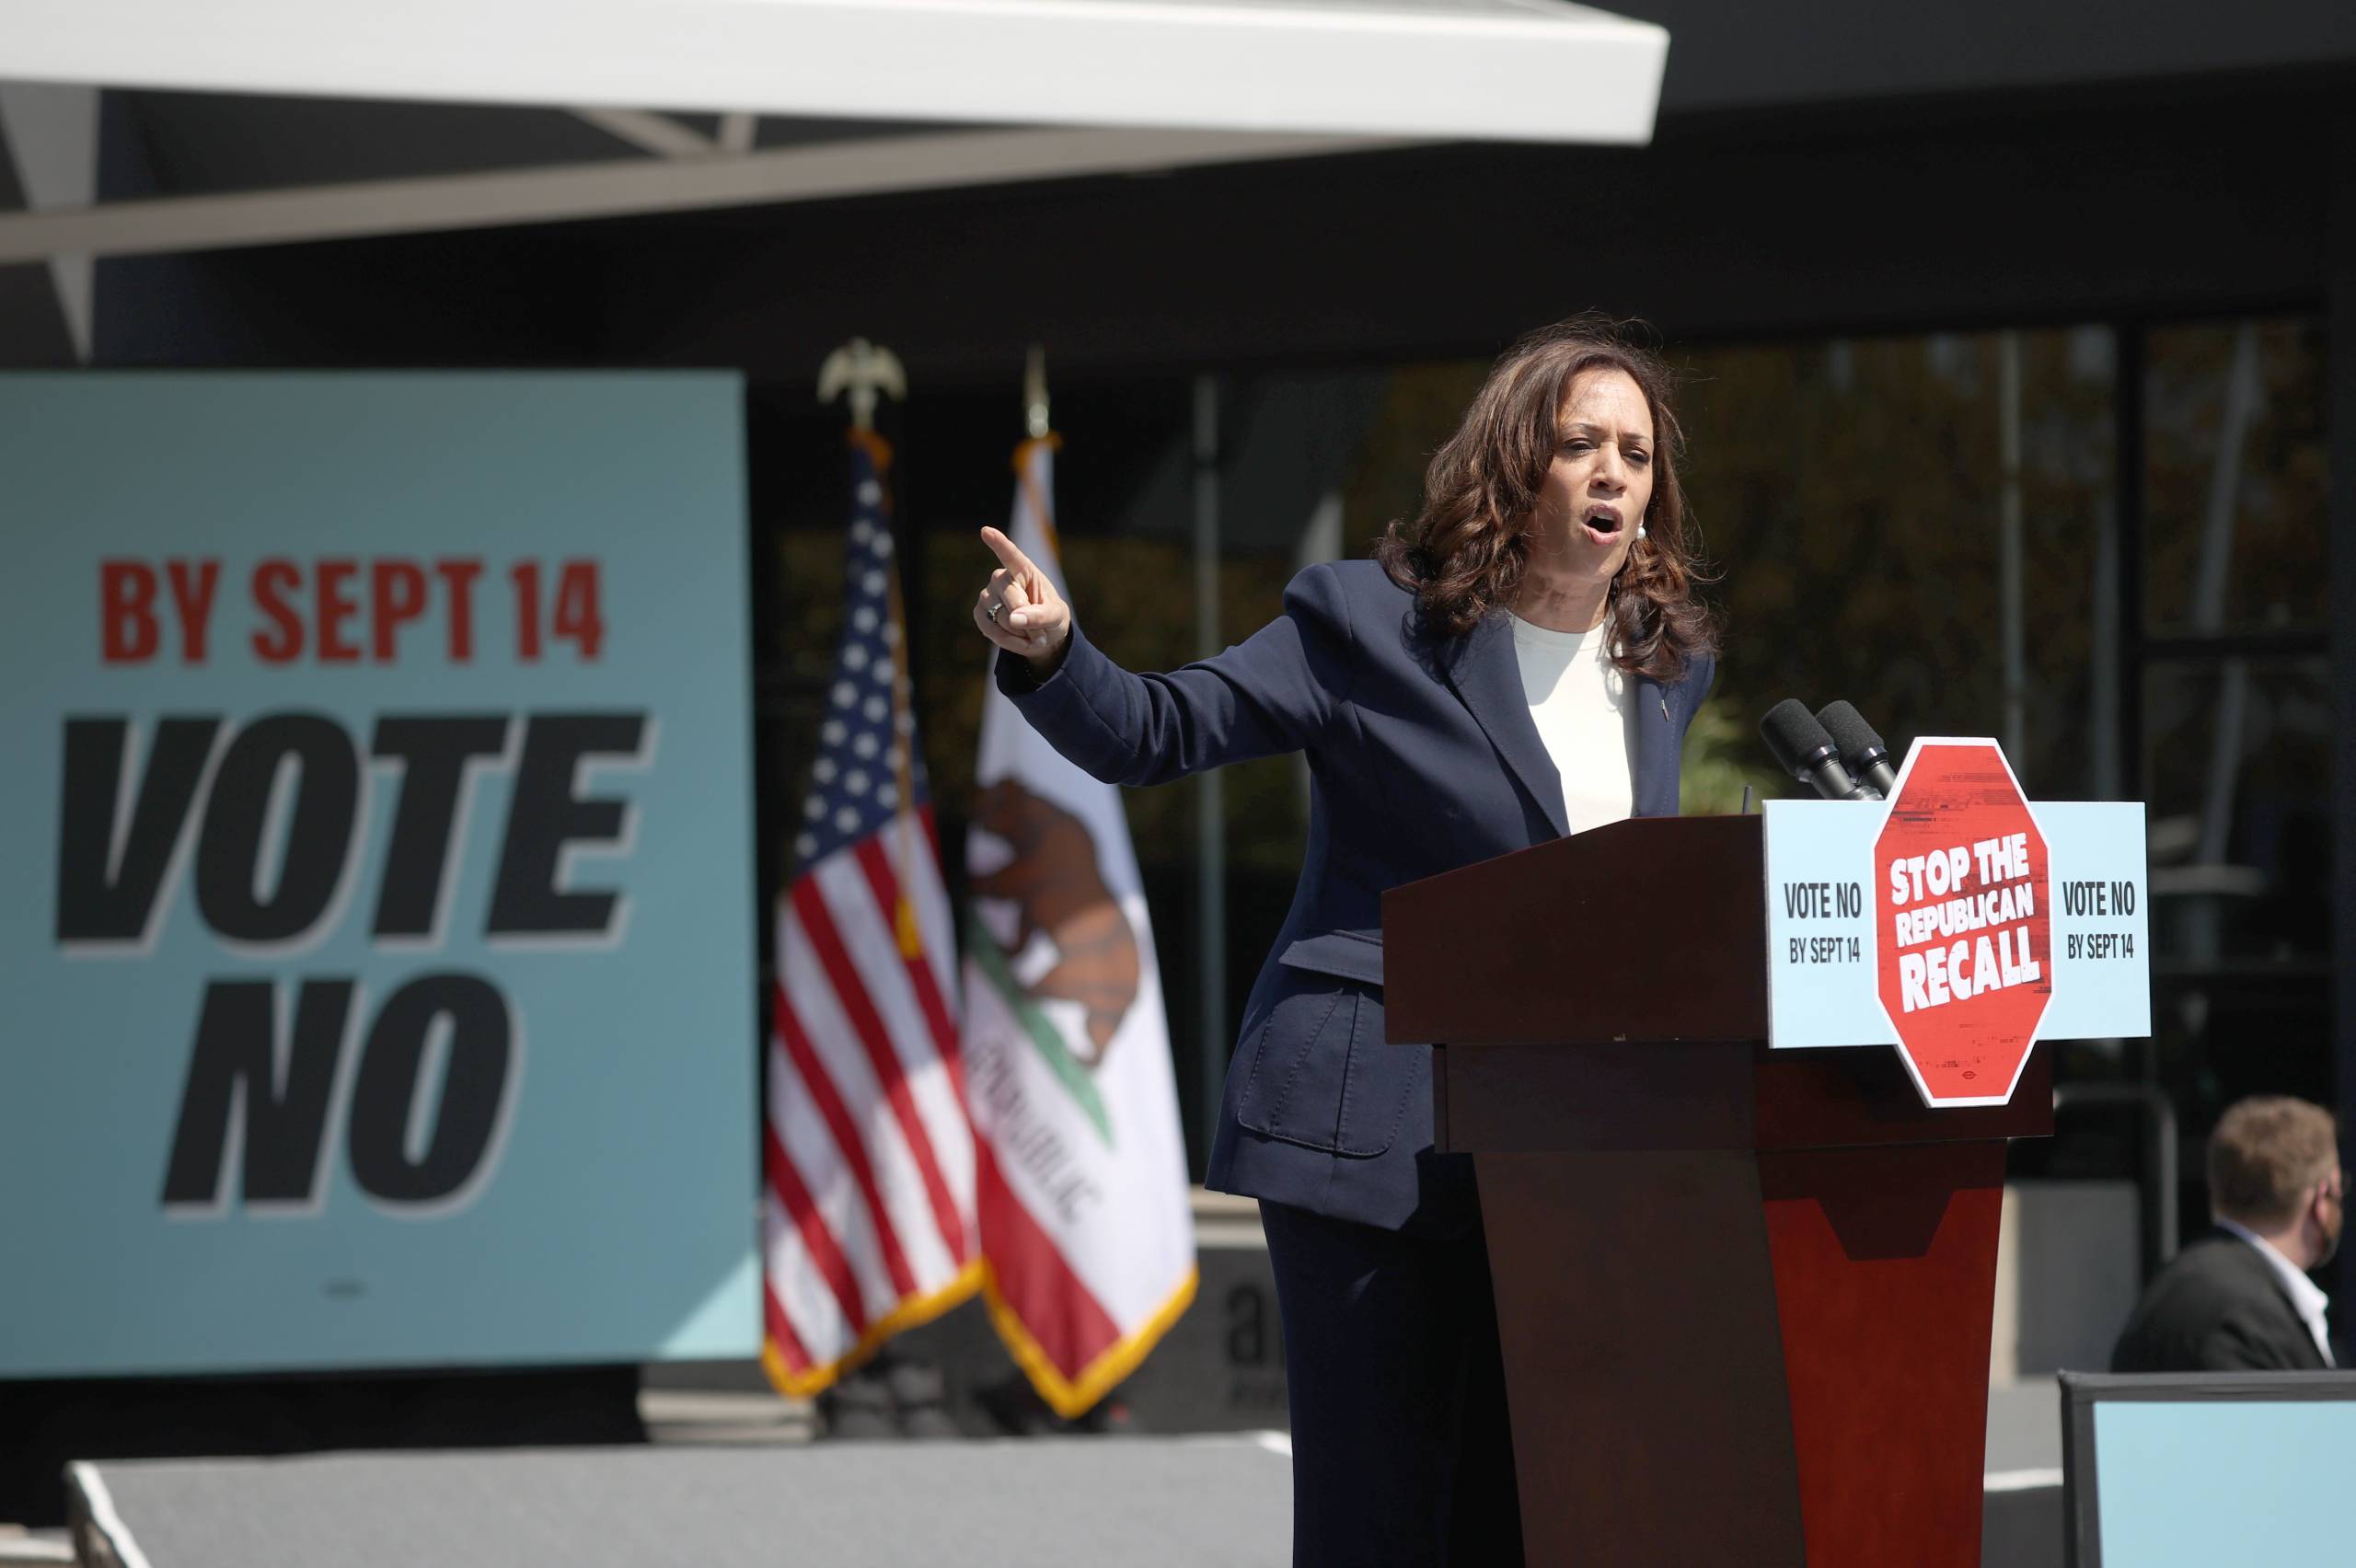 Kamala Harris stands behind a podium and points to her right as she speaks.